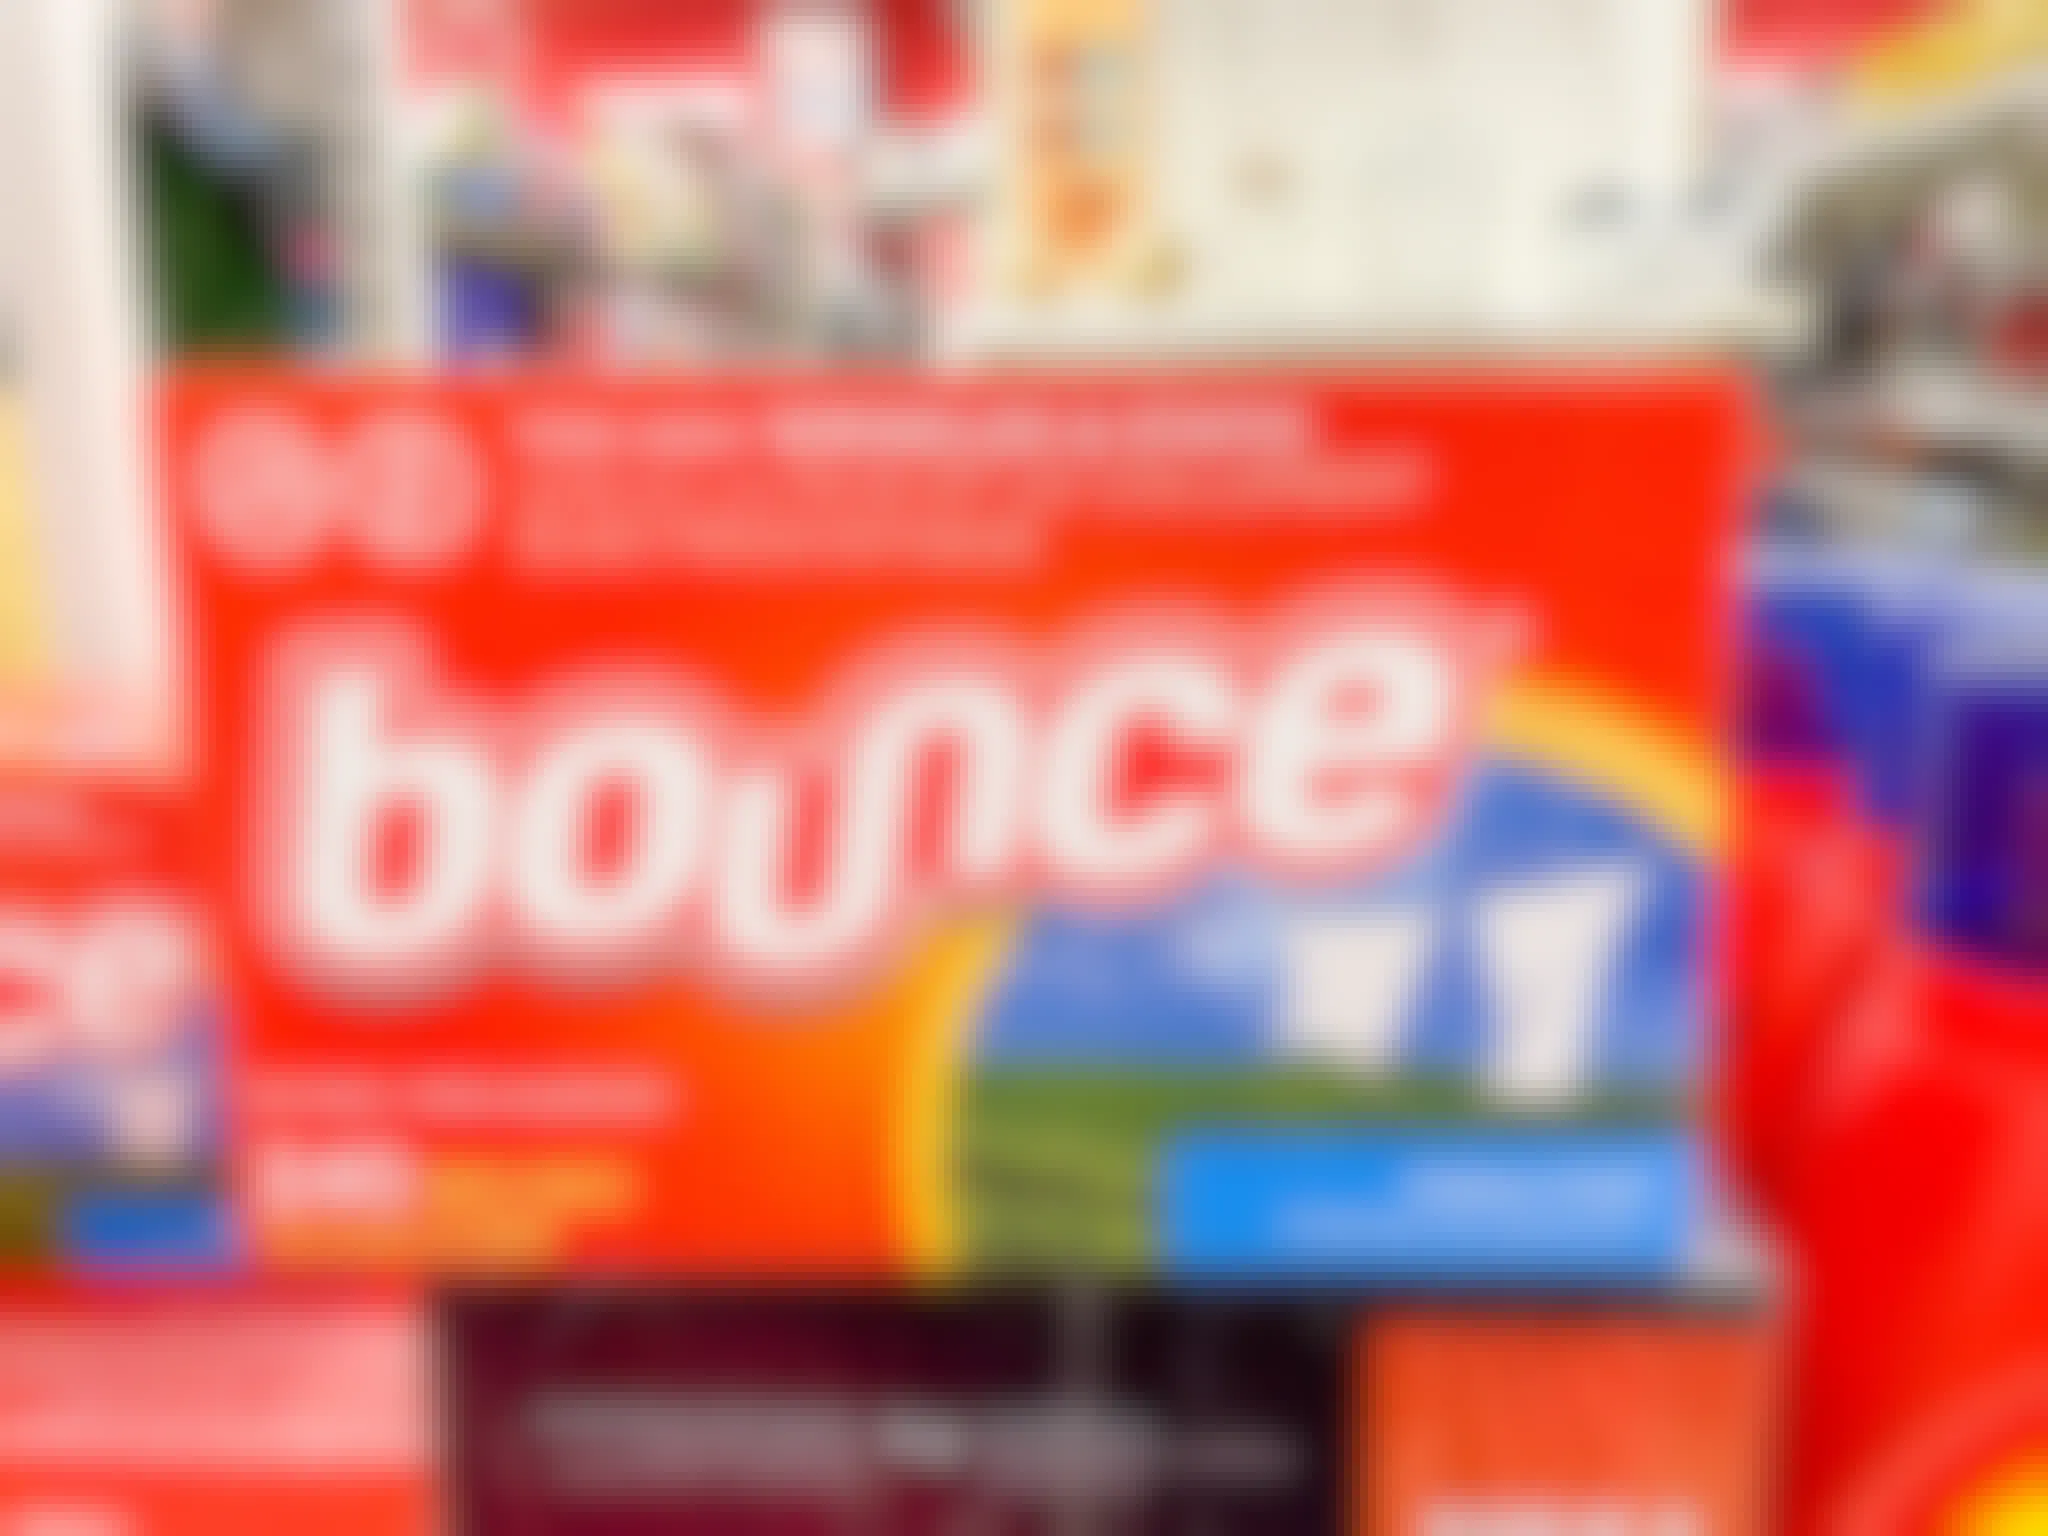 240 count box of bounce dryer sheets